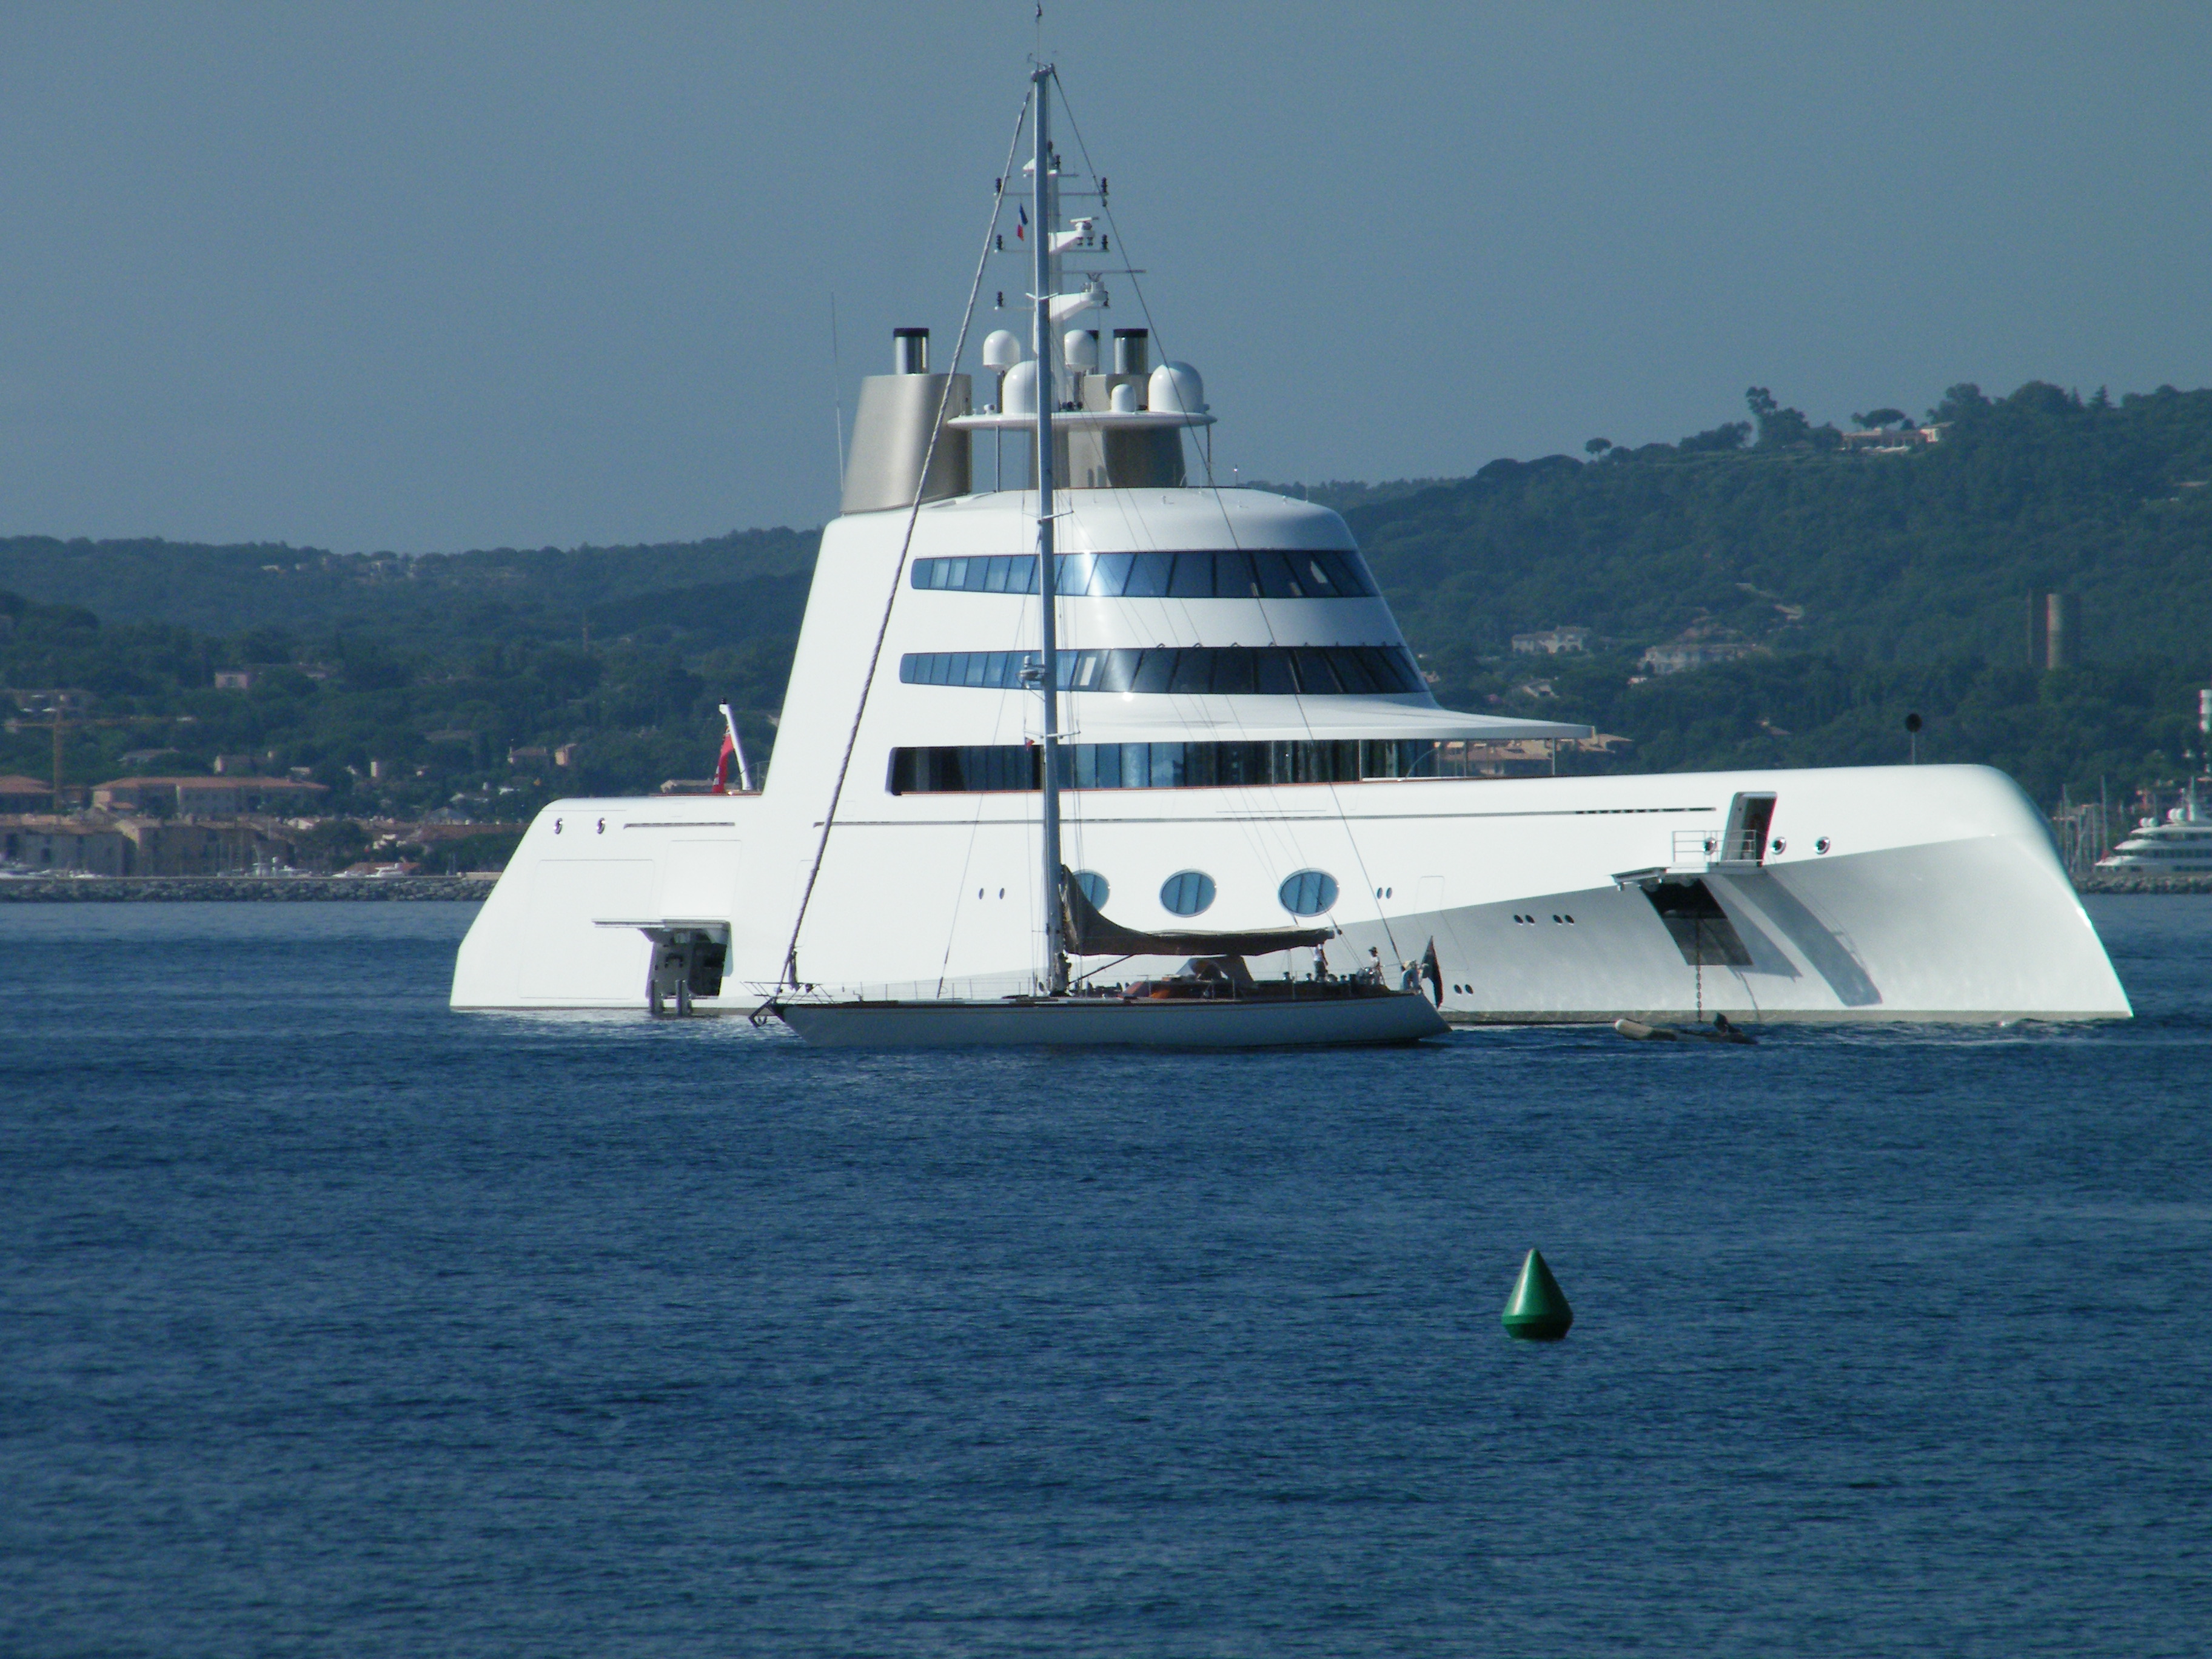 119m-B+V-yacht-A-in-France-St-Tropez-photographed-by-David-Z-Hart